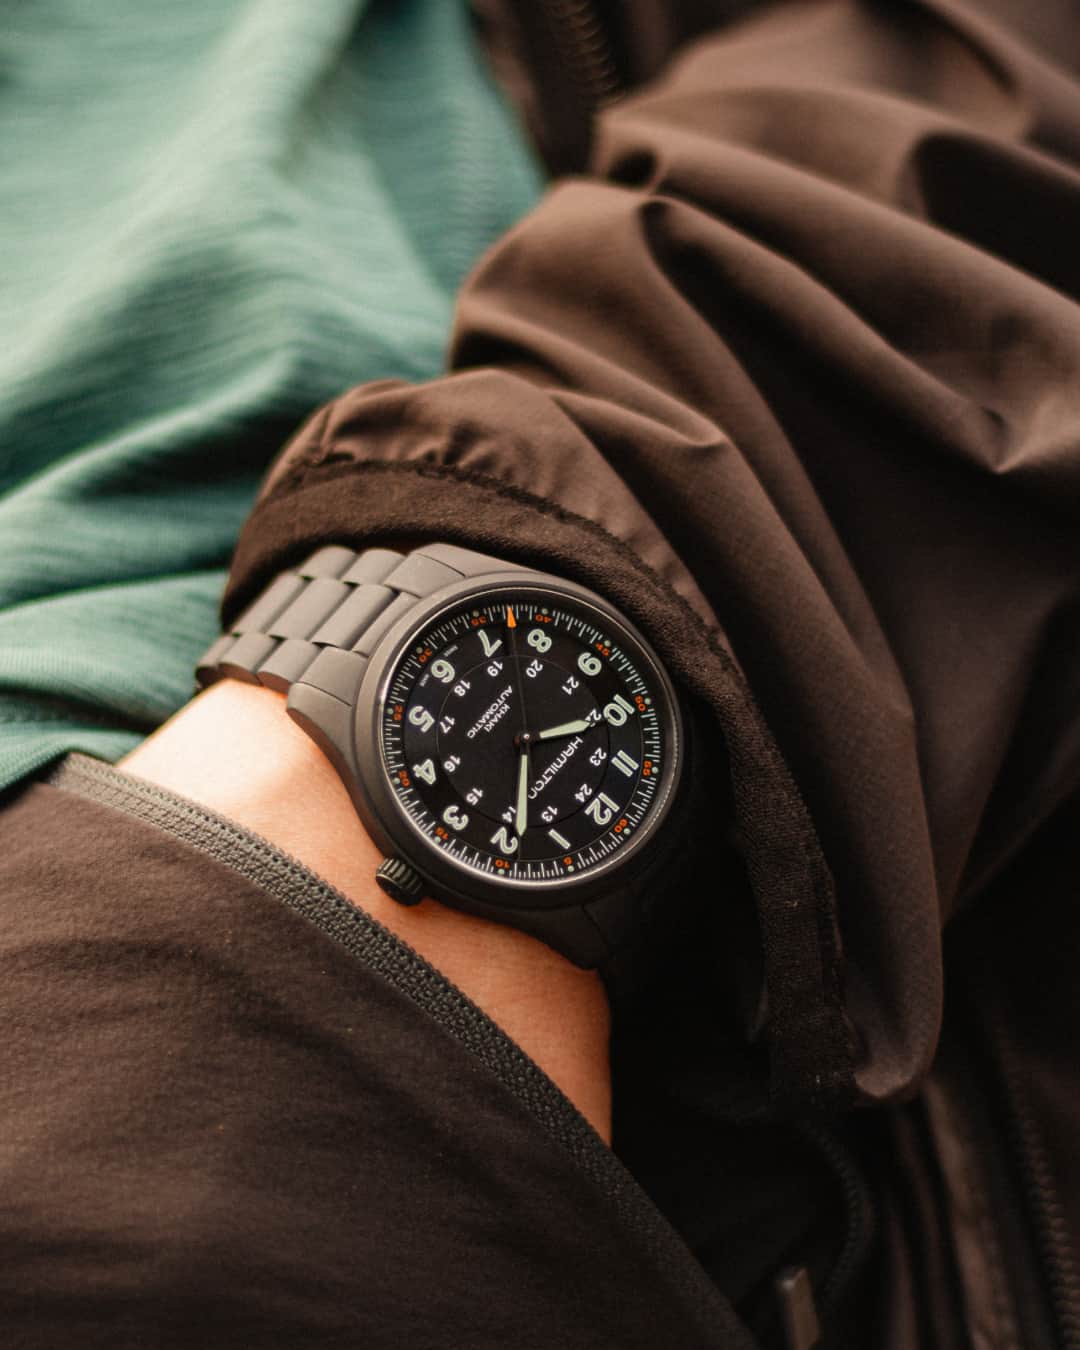 Hamilton Watchのインスタグラム：「Designed to meet the needs of all adventurers. Crafted from titanium, the Khaki Field Titanium Auto is ready to withstand the harshest environments, allowing explorers to focus on the thrill of their boldest adventures.  #hamiltonwatch #adventure #newtimepiece (Ref. H70215130)」